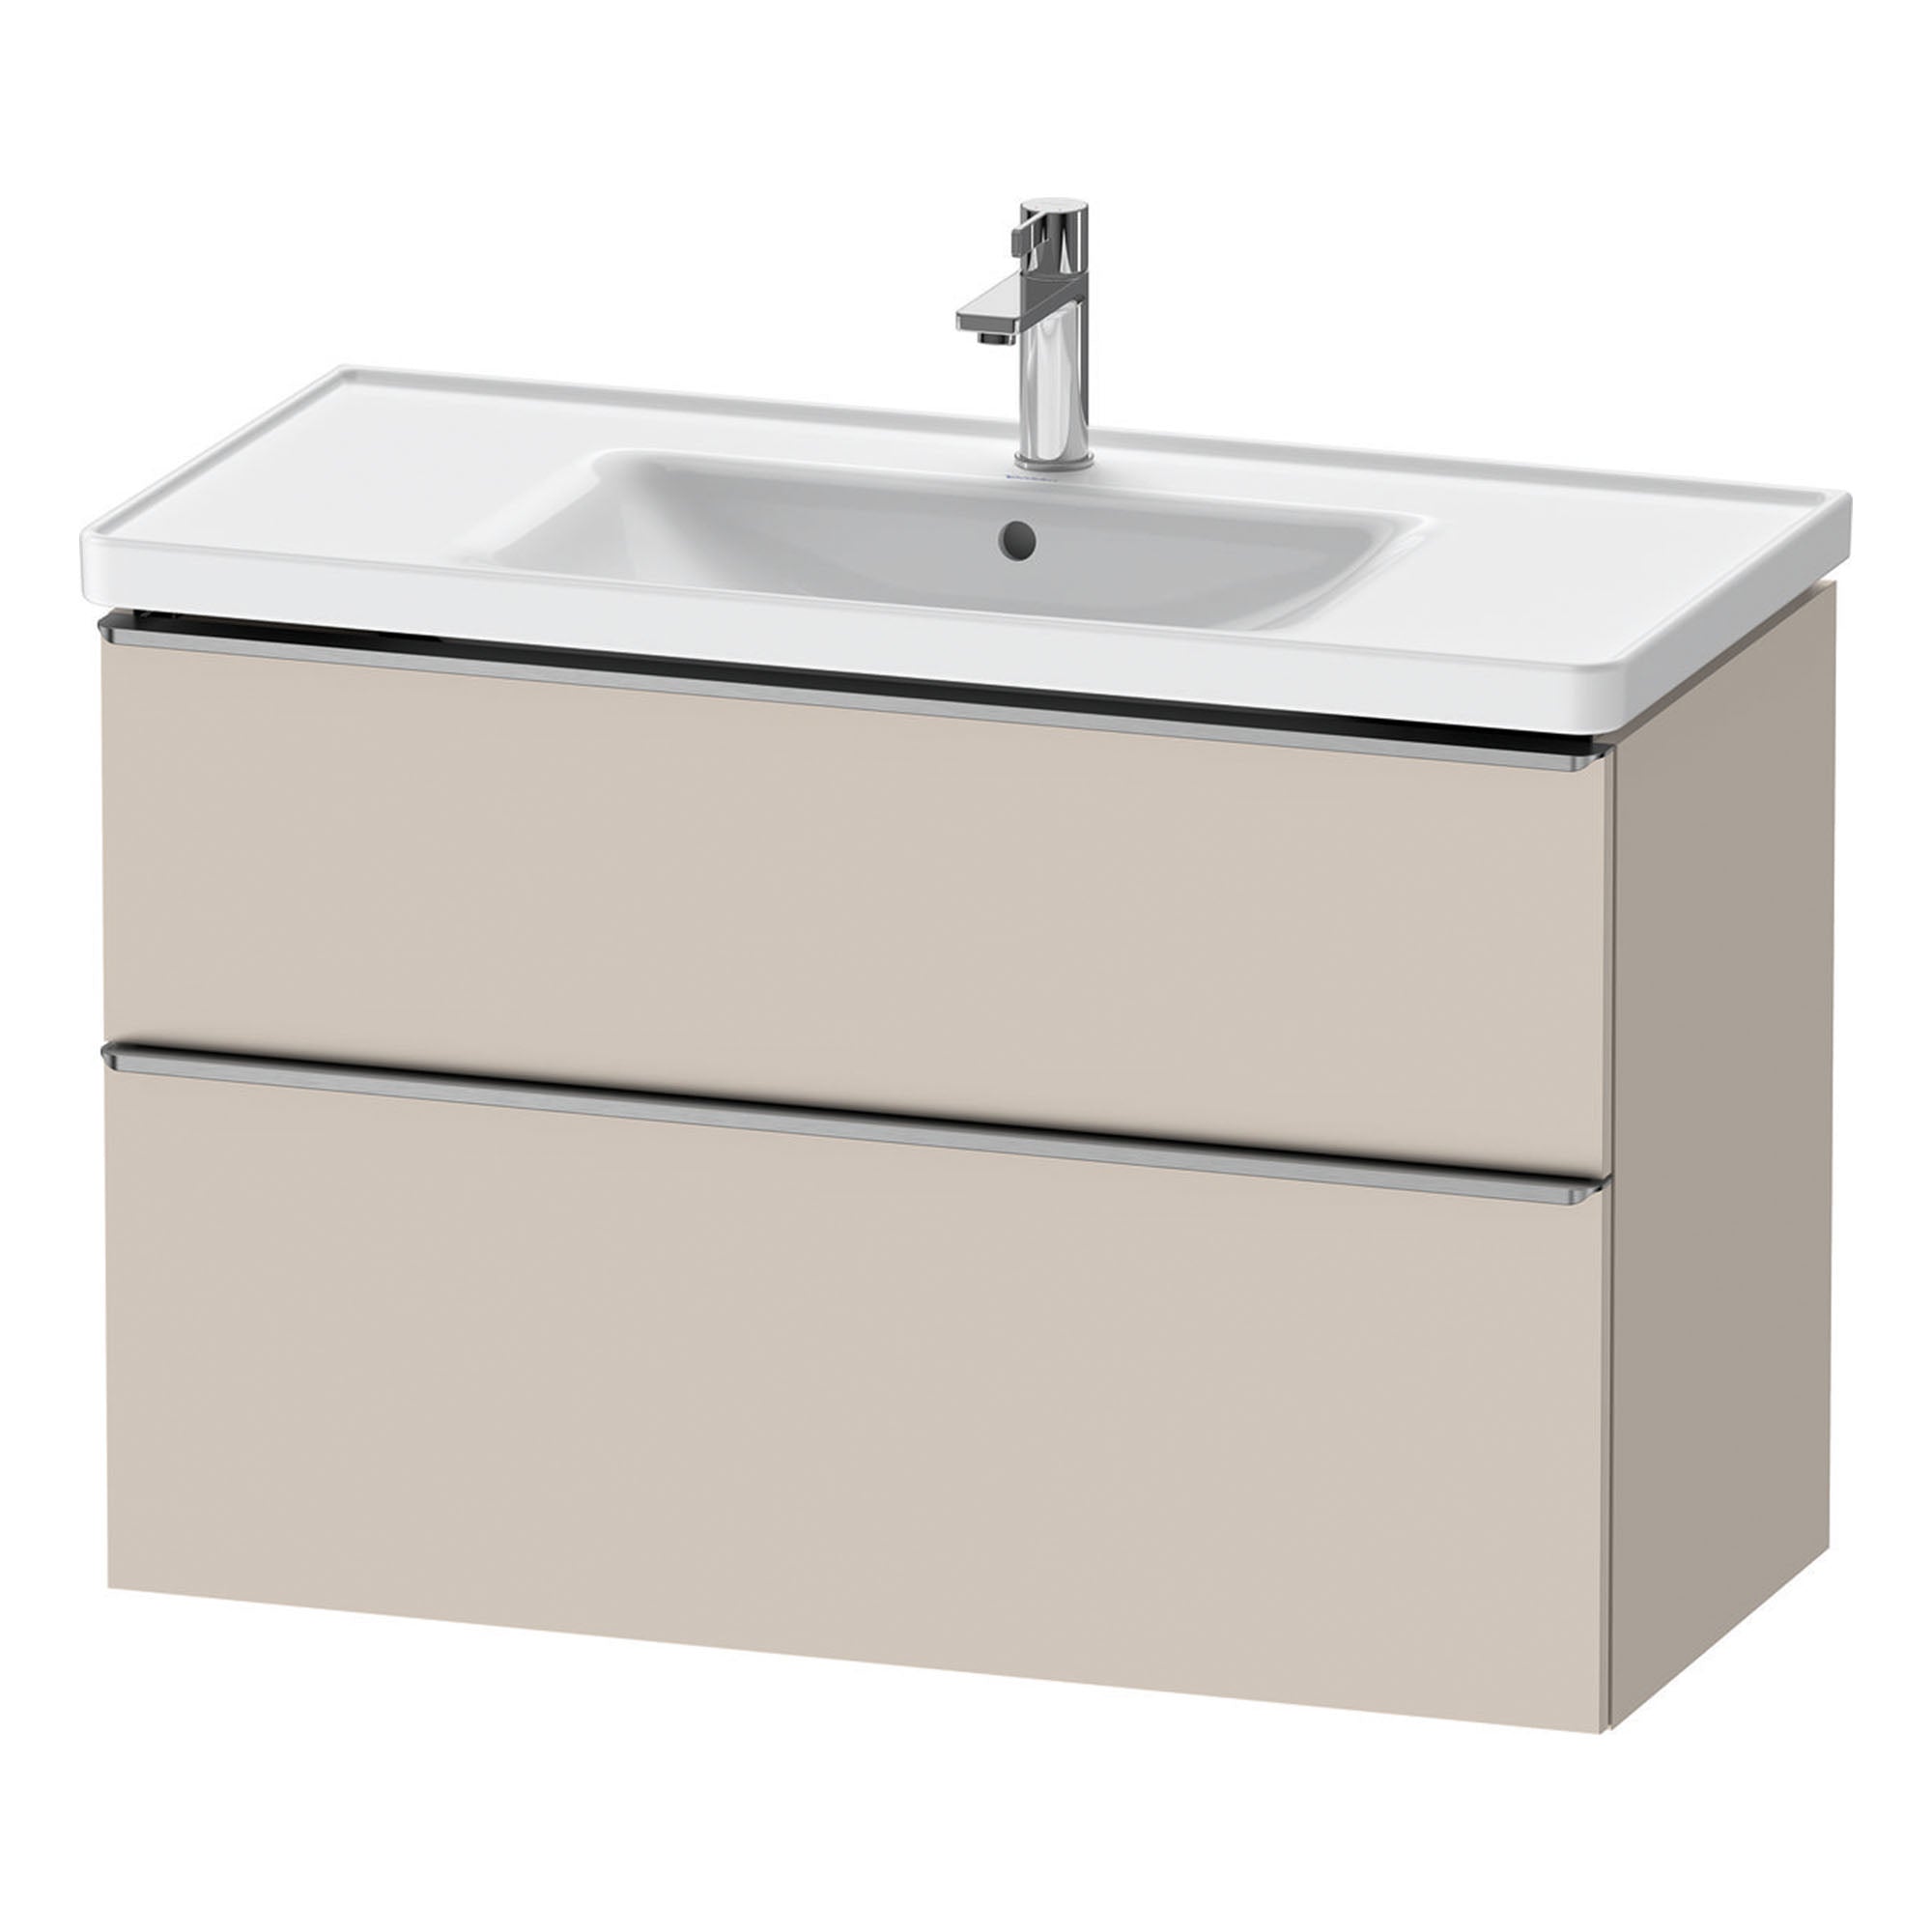 duravit d-neo 1000mm wall mounted vanity unit with d-neo basin taupe stainless steel handles